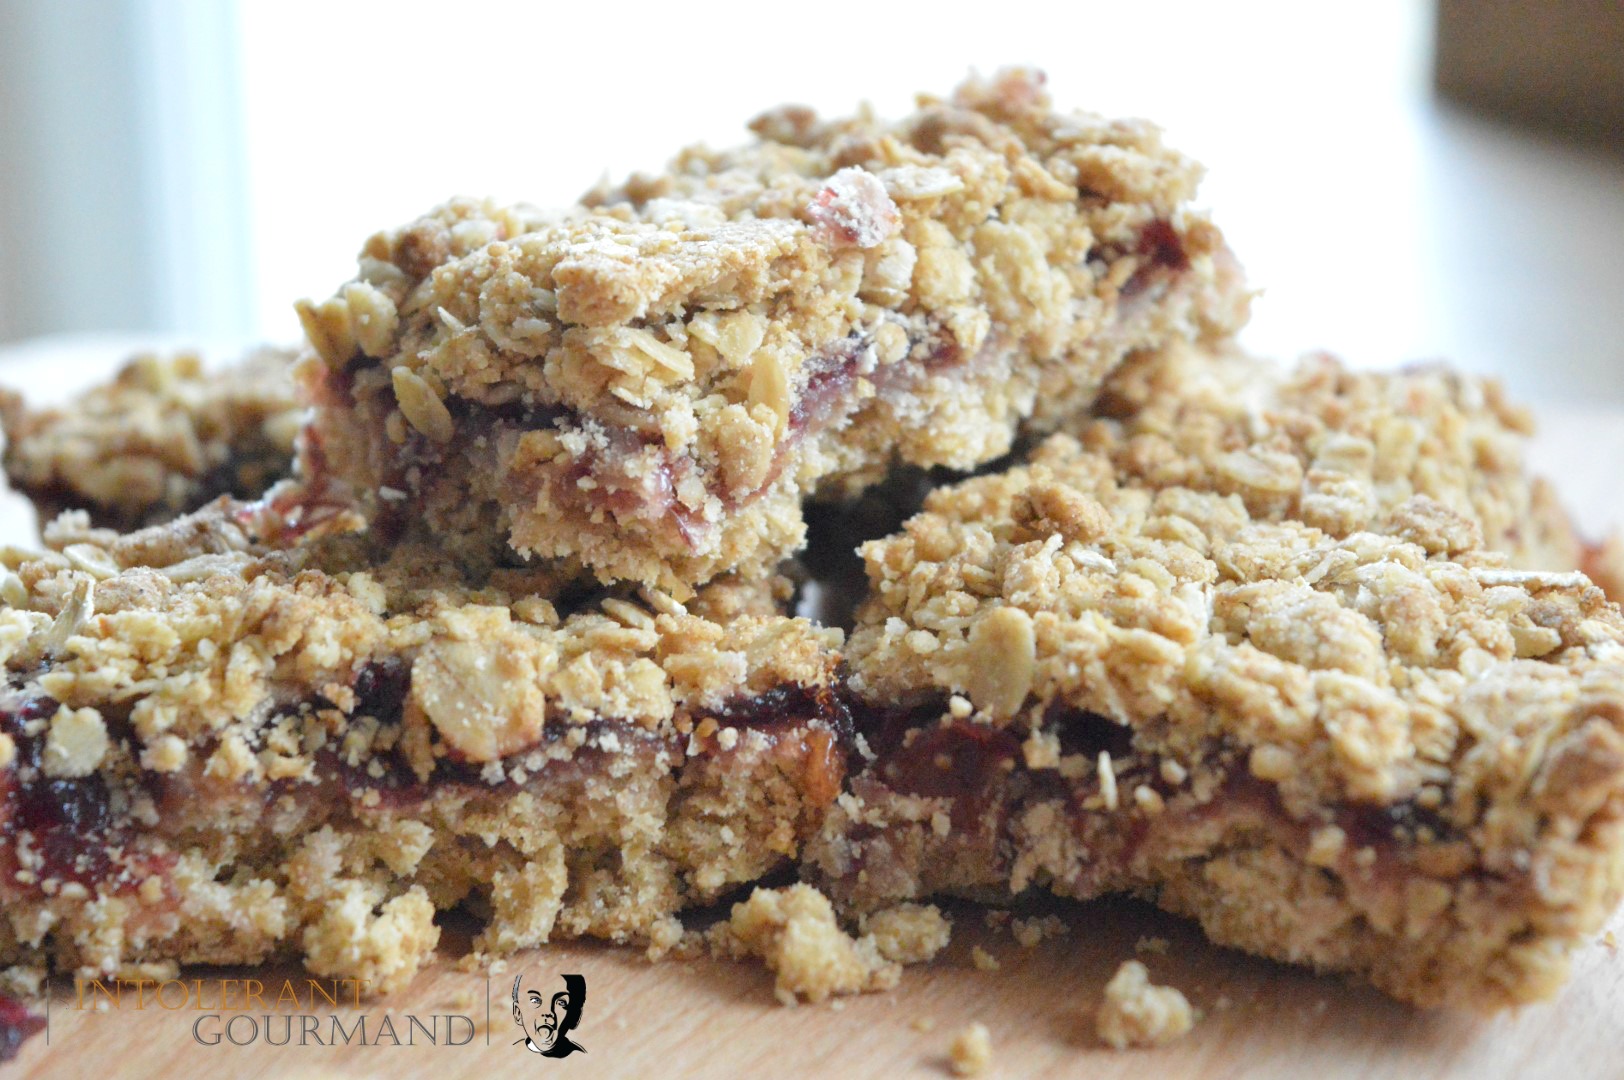 Cranberry Crumble Bar - a delicious christmas treat that's gluten-free, nut-free, wheat-free, egg-free, dairy-free and tastes delicious! www.intolerantgourmand.com